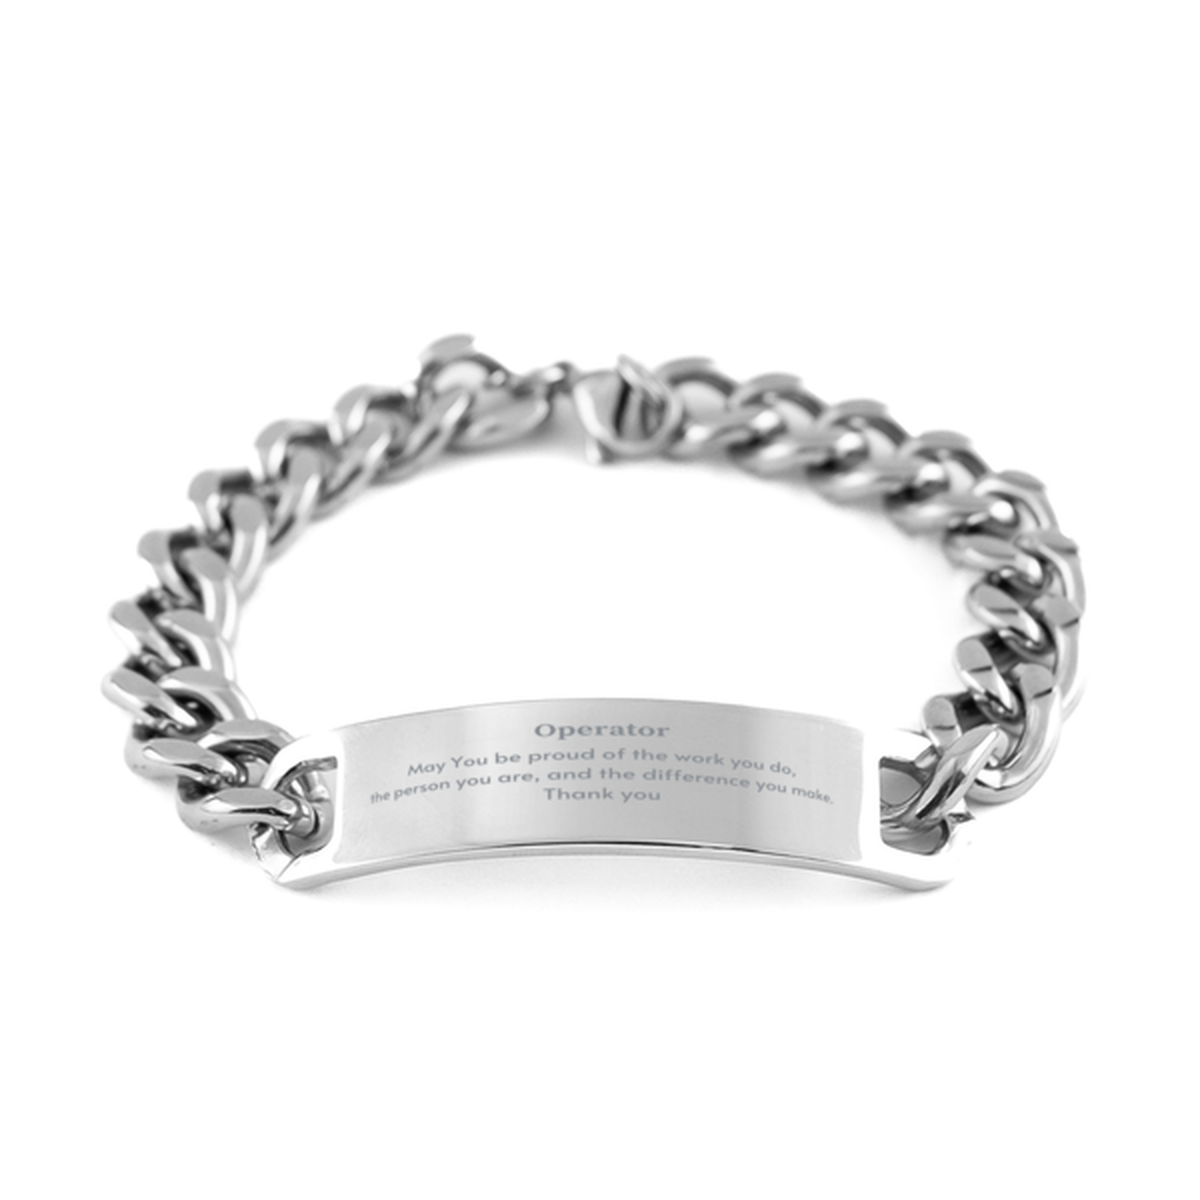 Heartwarming Cuban Chain Stainless Steel Bracelet Retirement Coworkers Gifts for Operator, Operator May You be proud of the work you do, the person you are Gifts for Boss Men Women Friends